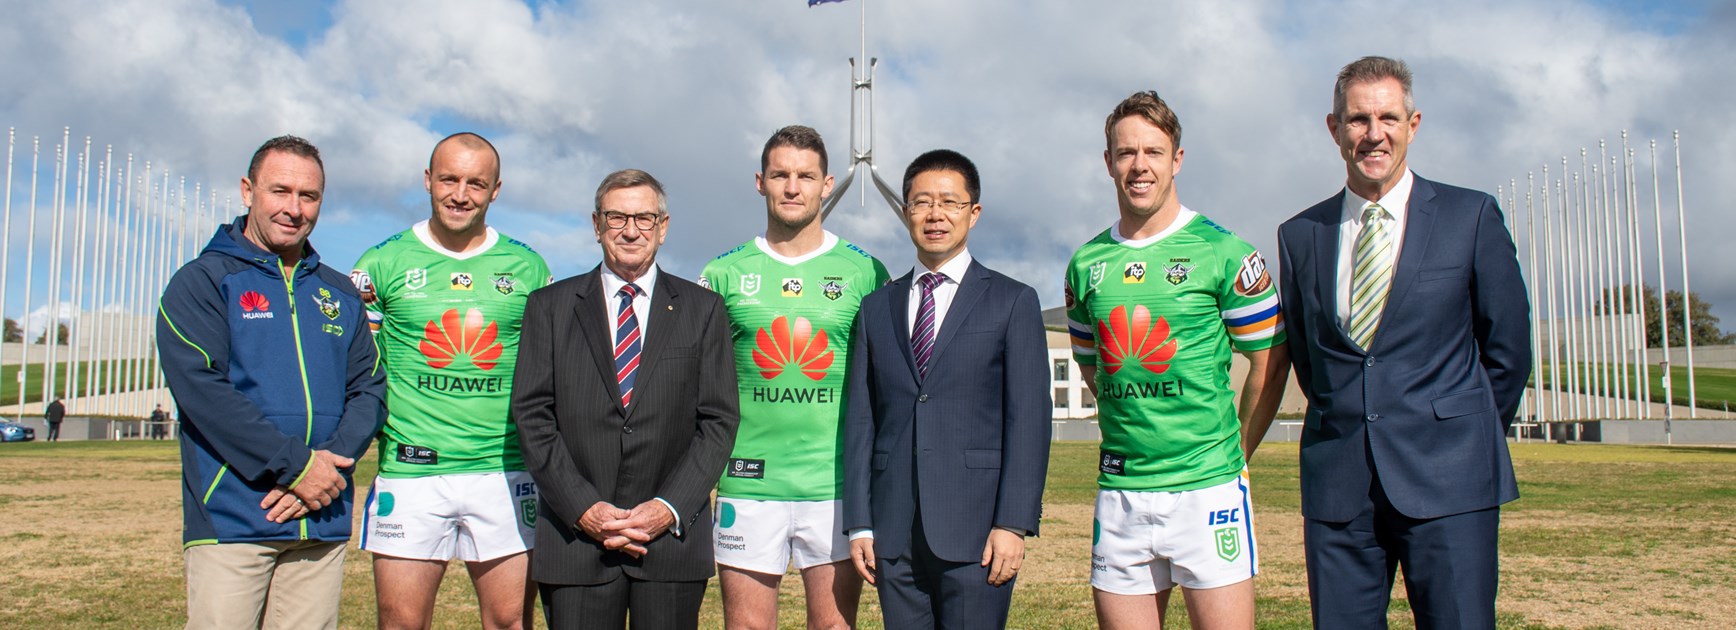 Huawei re-signs as major sponsor for Canberra Raiders